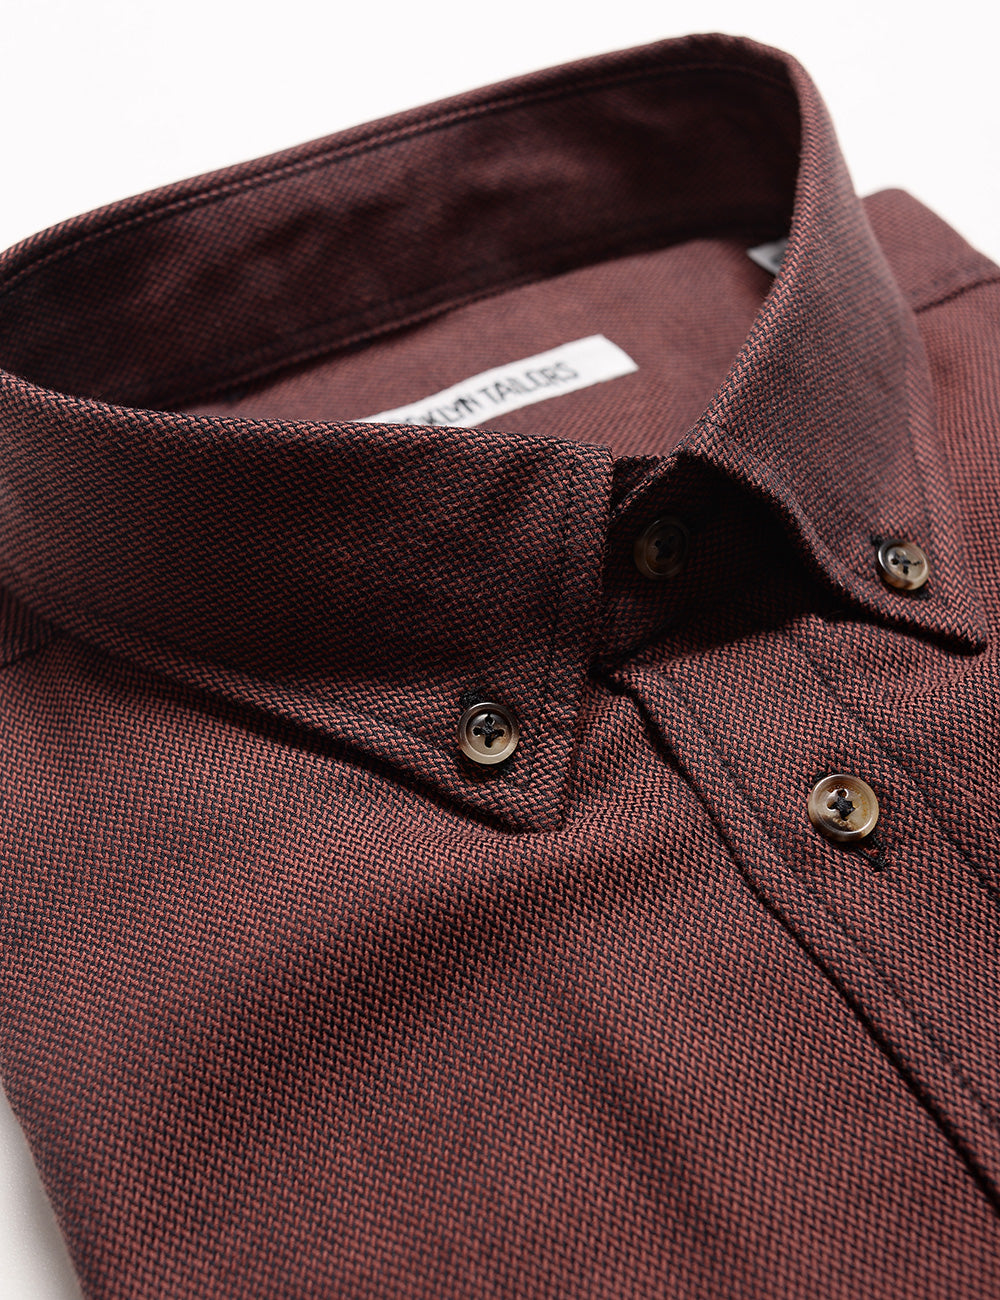 Detail shot of button down collar on Brooklyn Tailors BKT10 Slim Casual Shirt in Soft Basketweave - Aged Brick